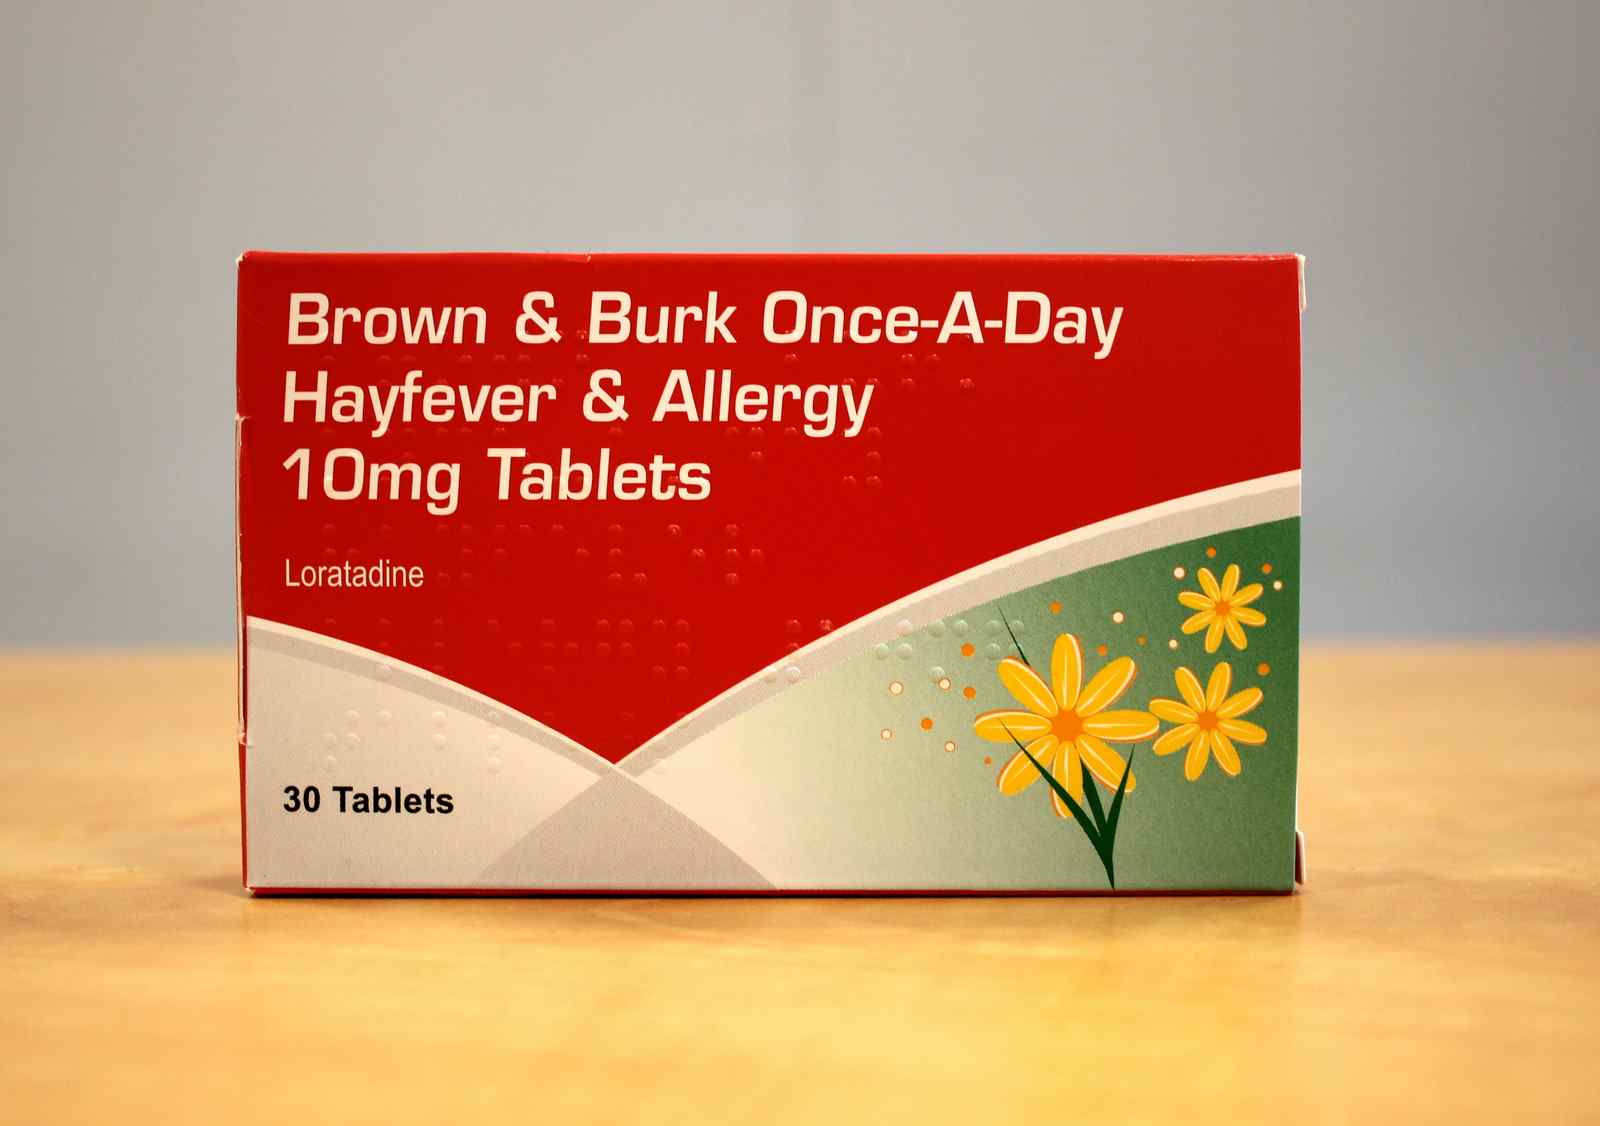 Once -A-Day Hayfever & Allergy 10 mg 30 Tablets